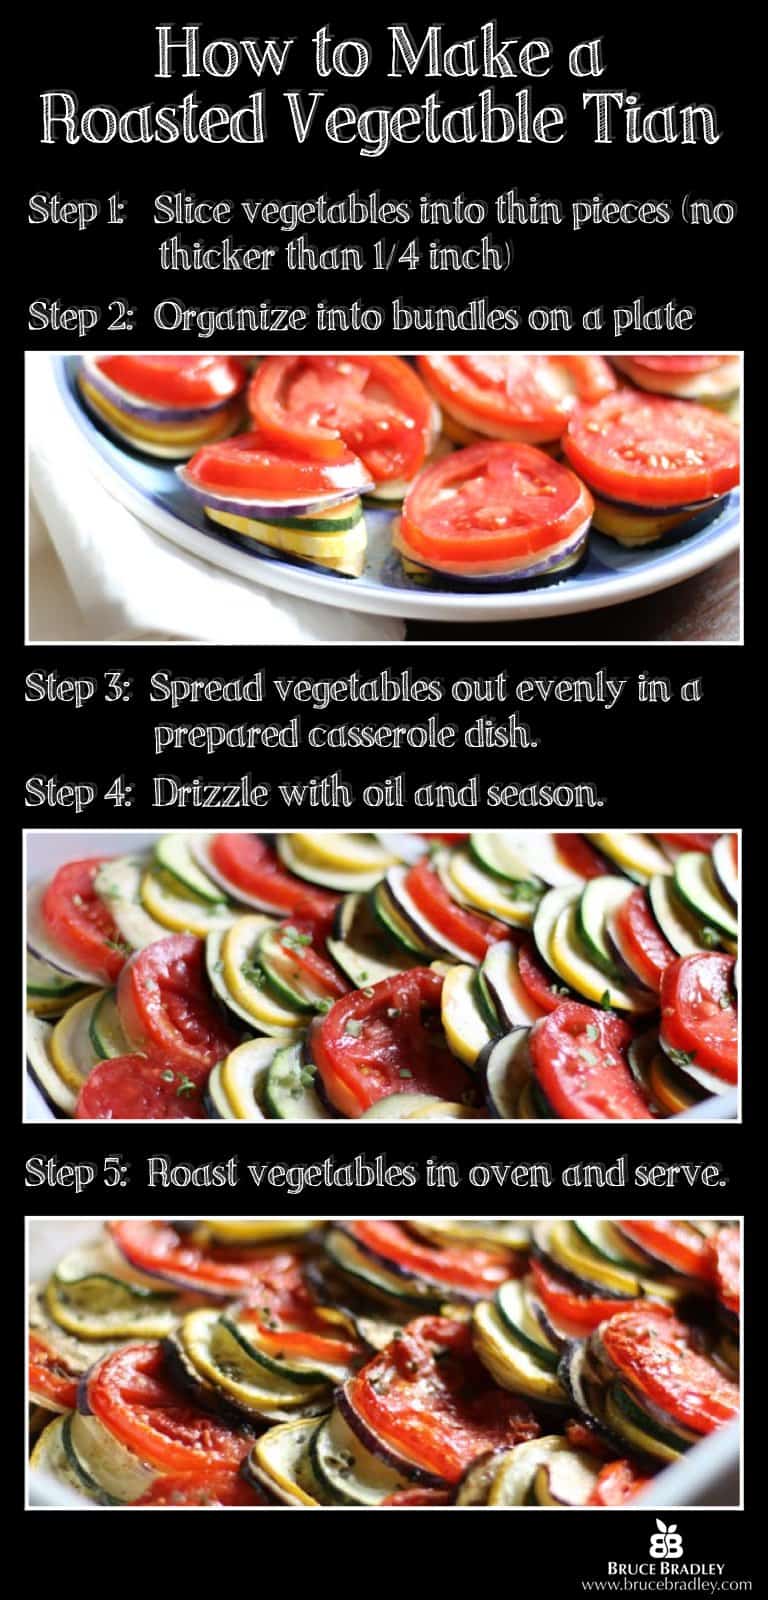 How To Make A Vegetable Tian In 5 Easy Steps!